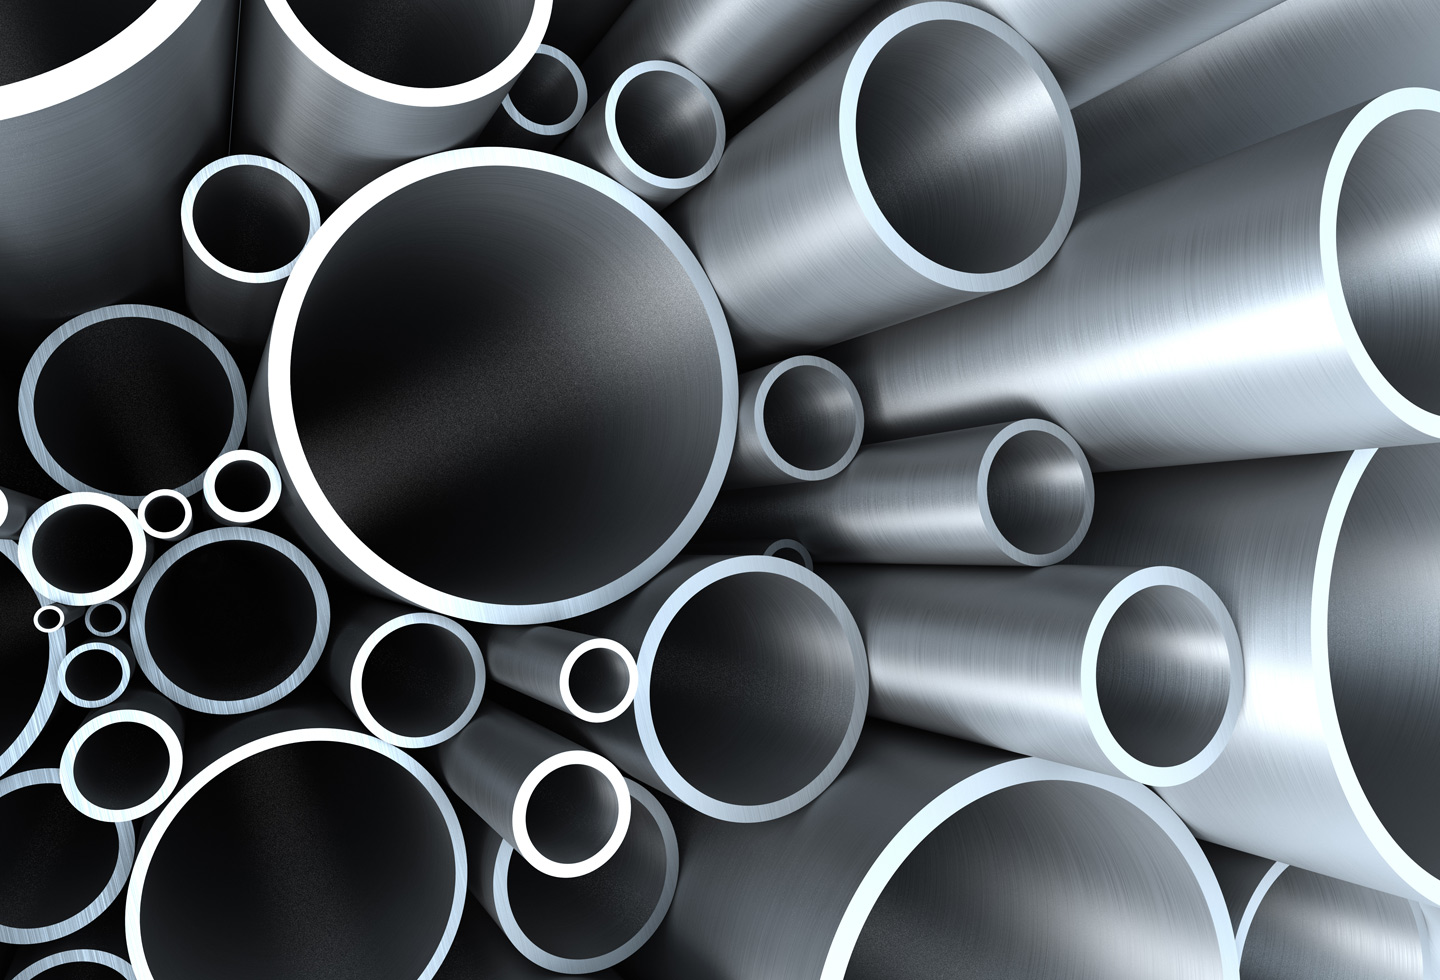 aluminium alloy price doubles in the last few mouth